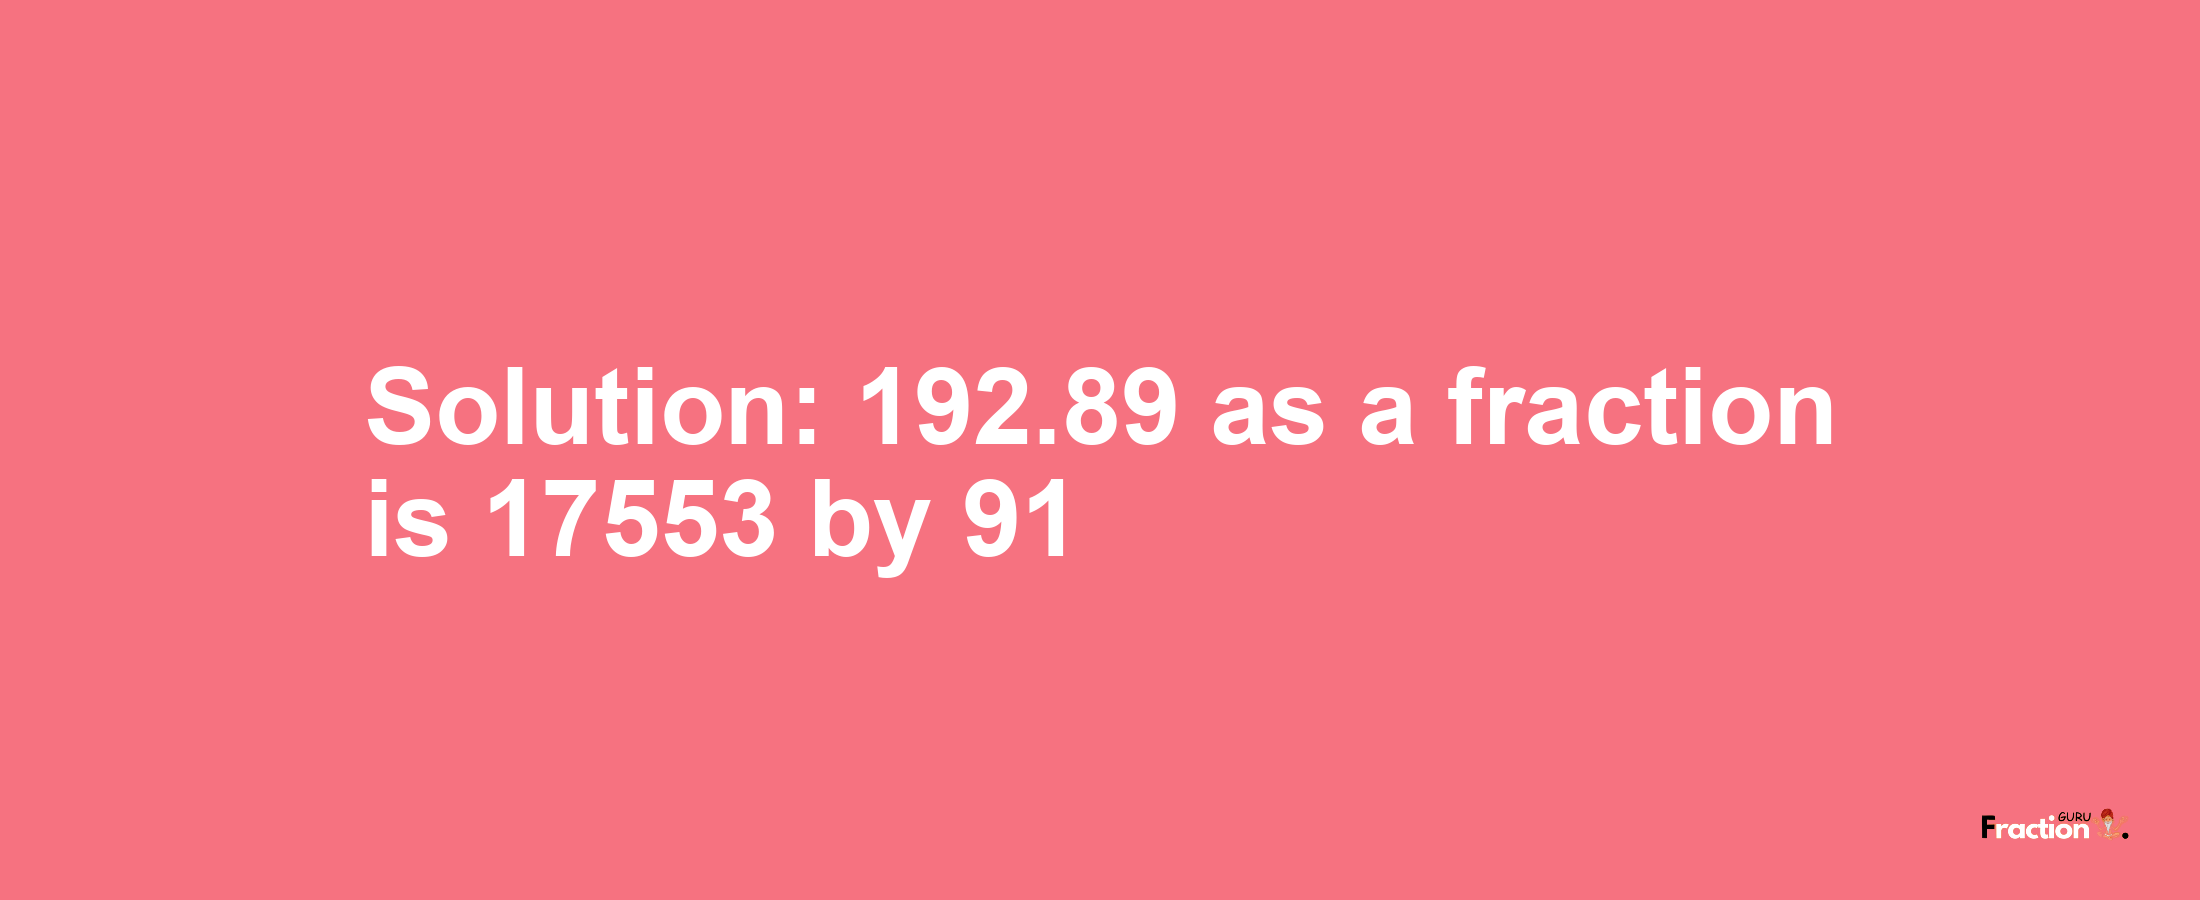 Solution:192.89 as a fraction is 17553/91